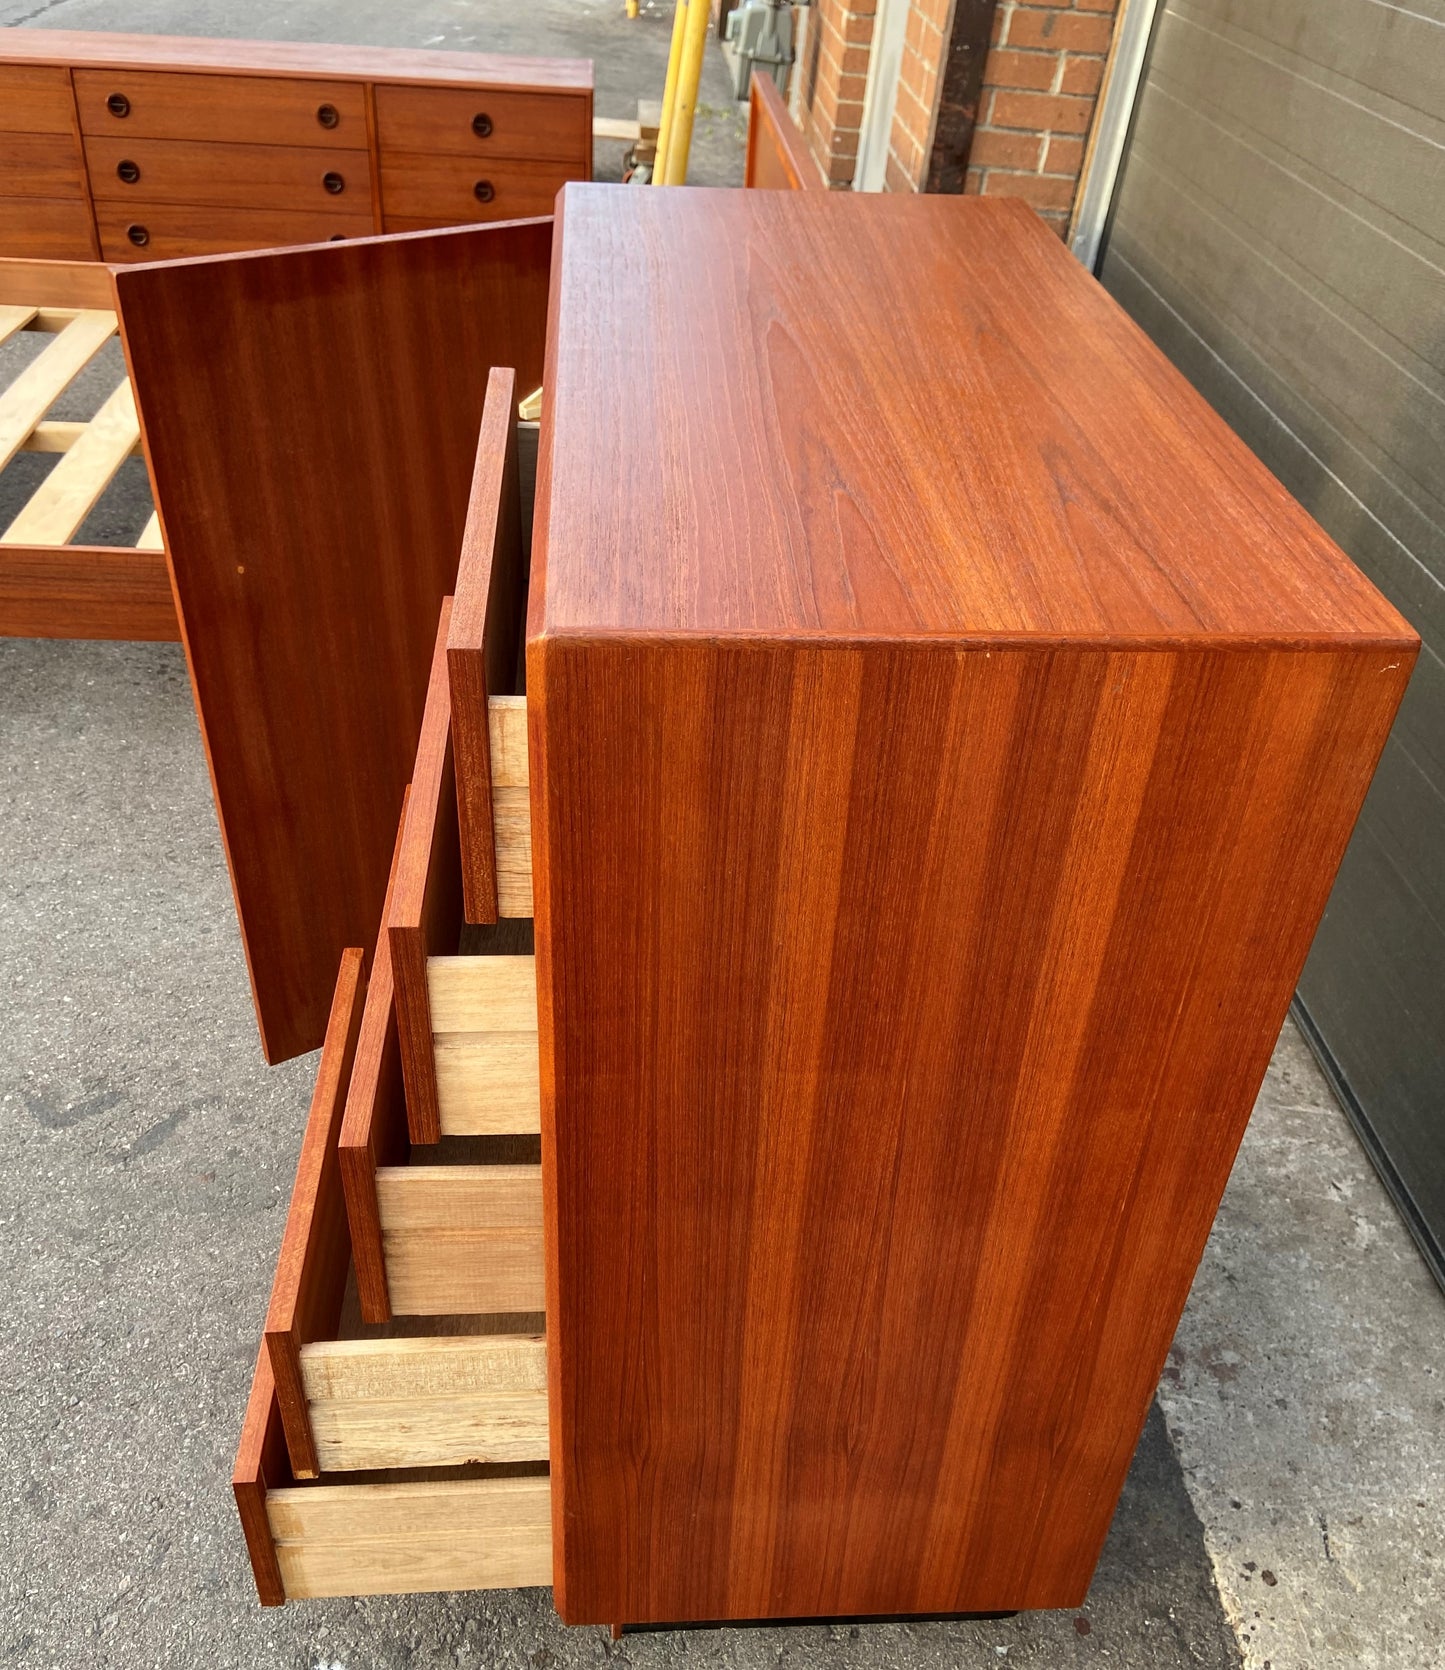 REFINISHED Mid Century Modern teak bedroom set w queen bed and rosewood details